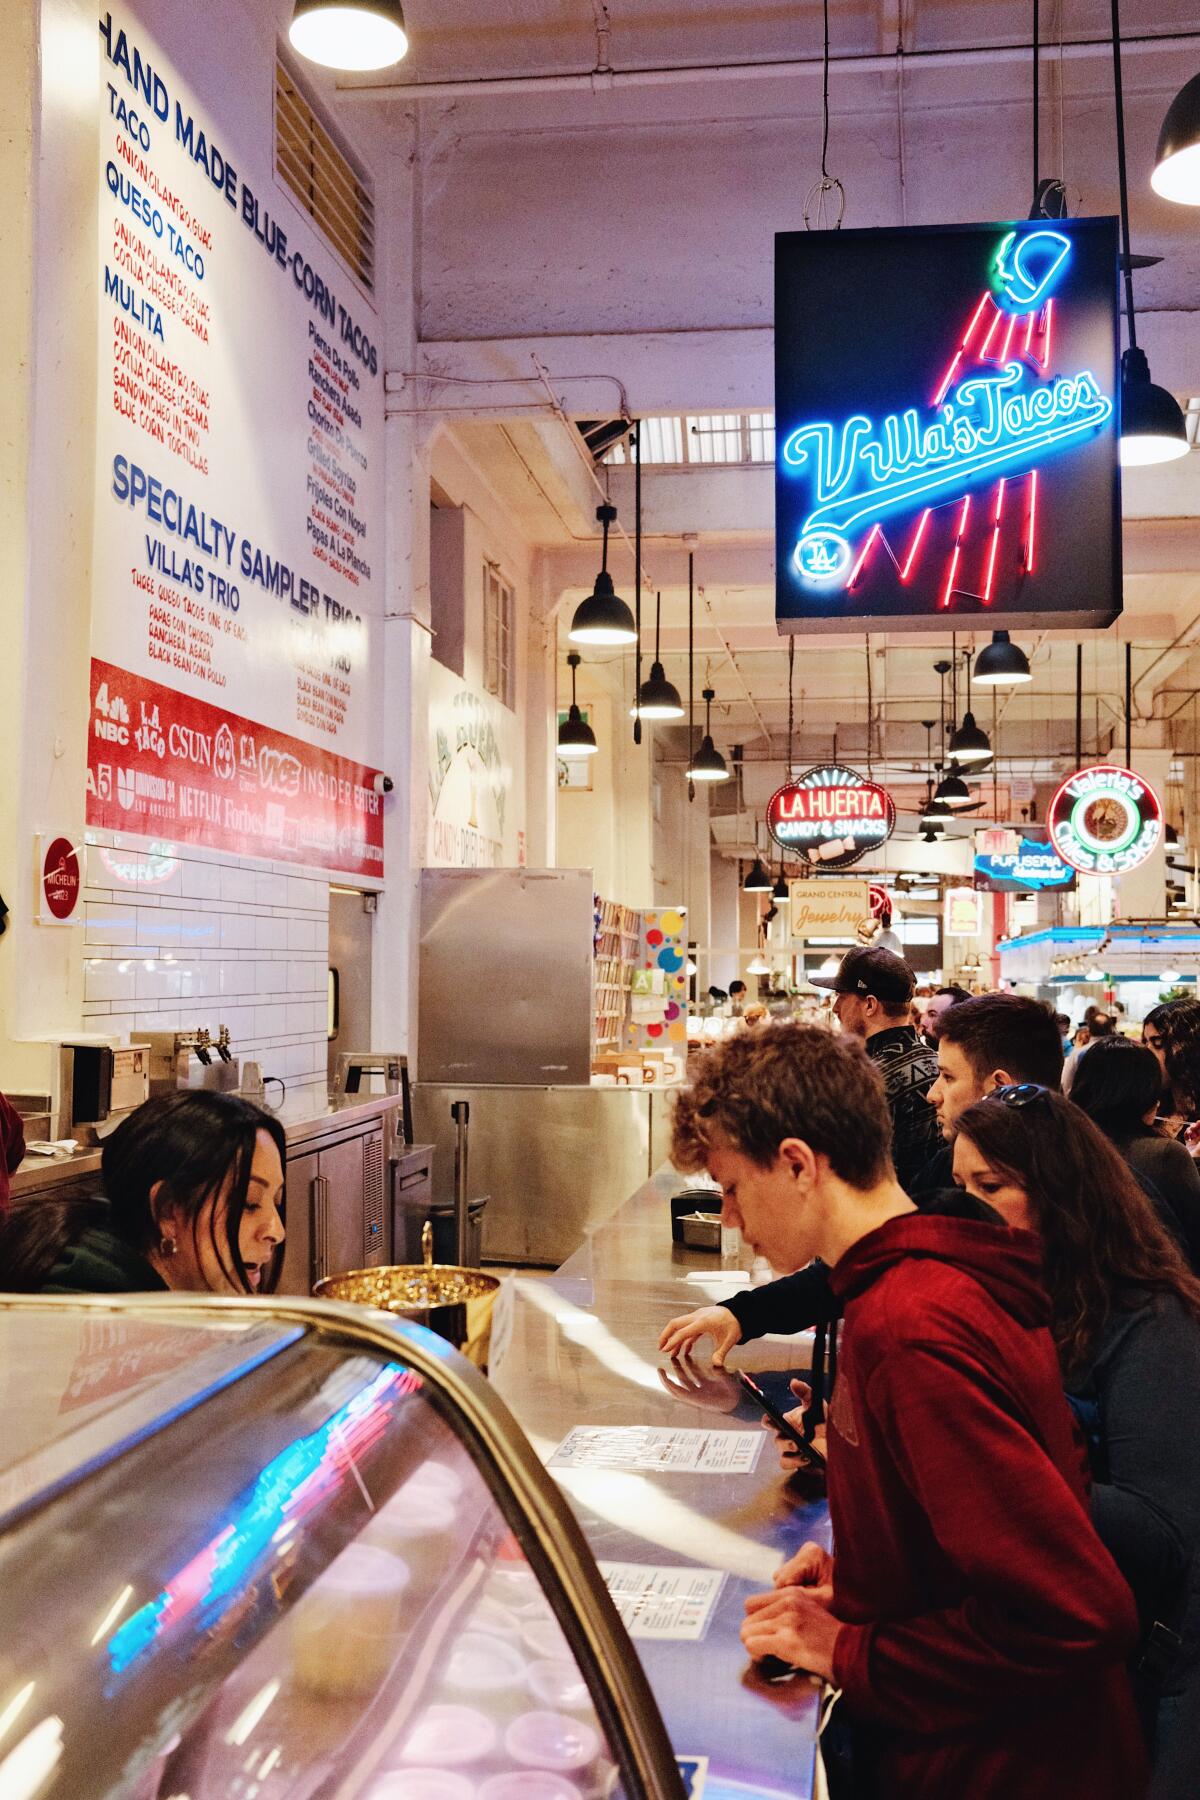 Guests ordering at the Villa's Tacos stand in Grand Central Market Los Angeles